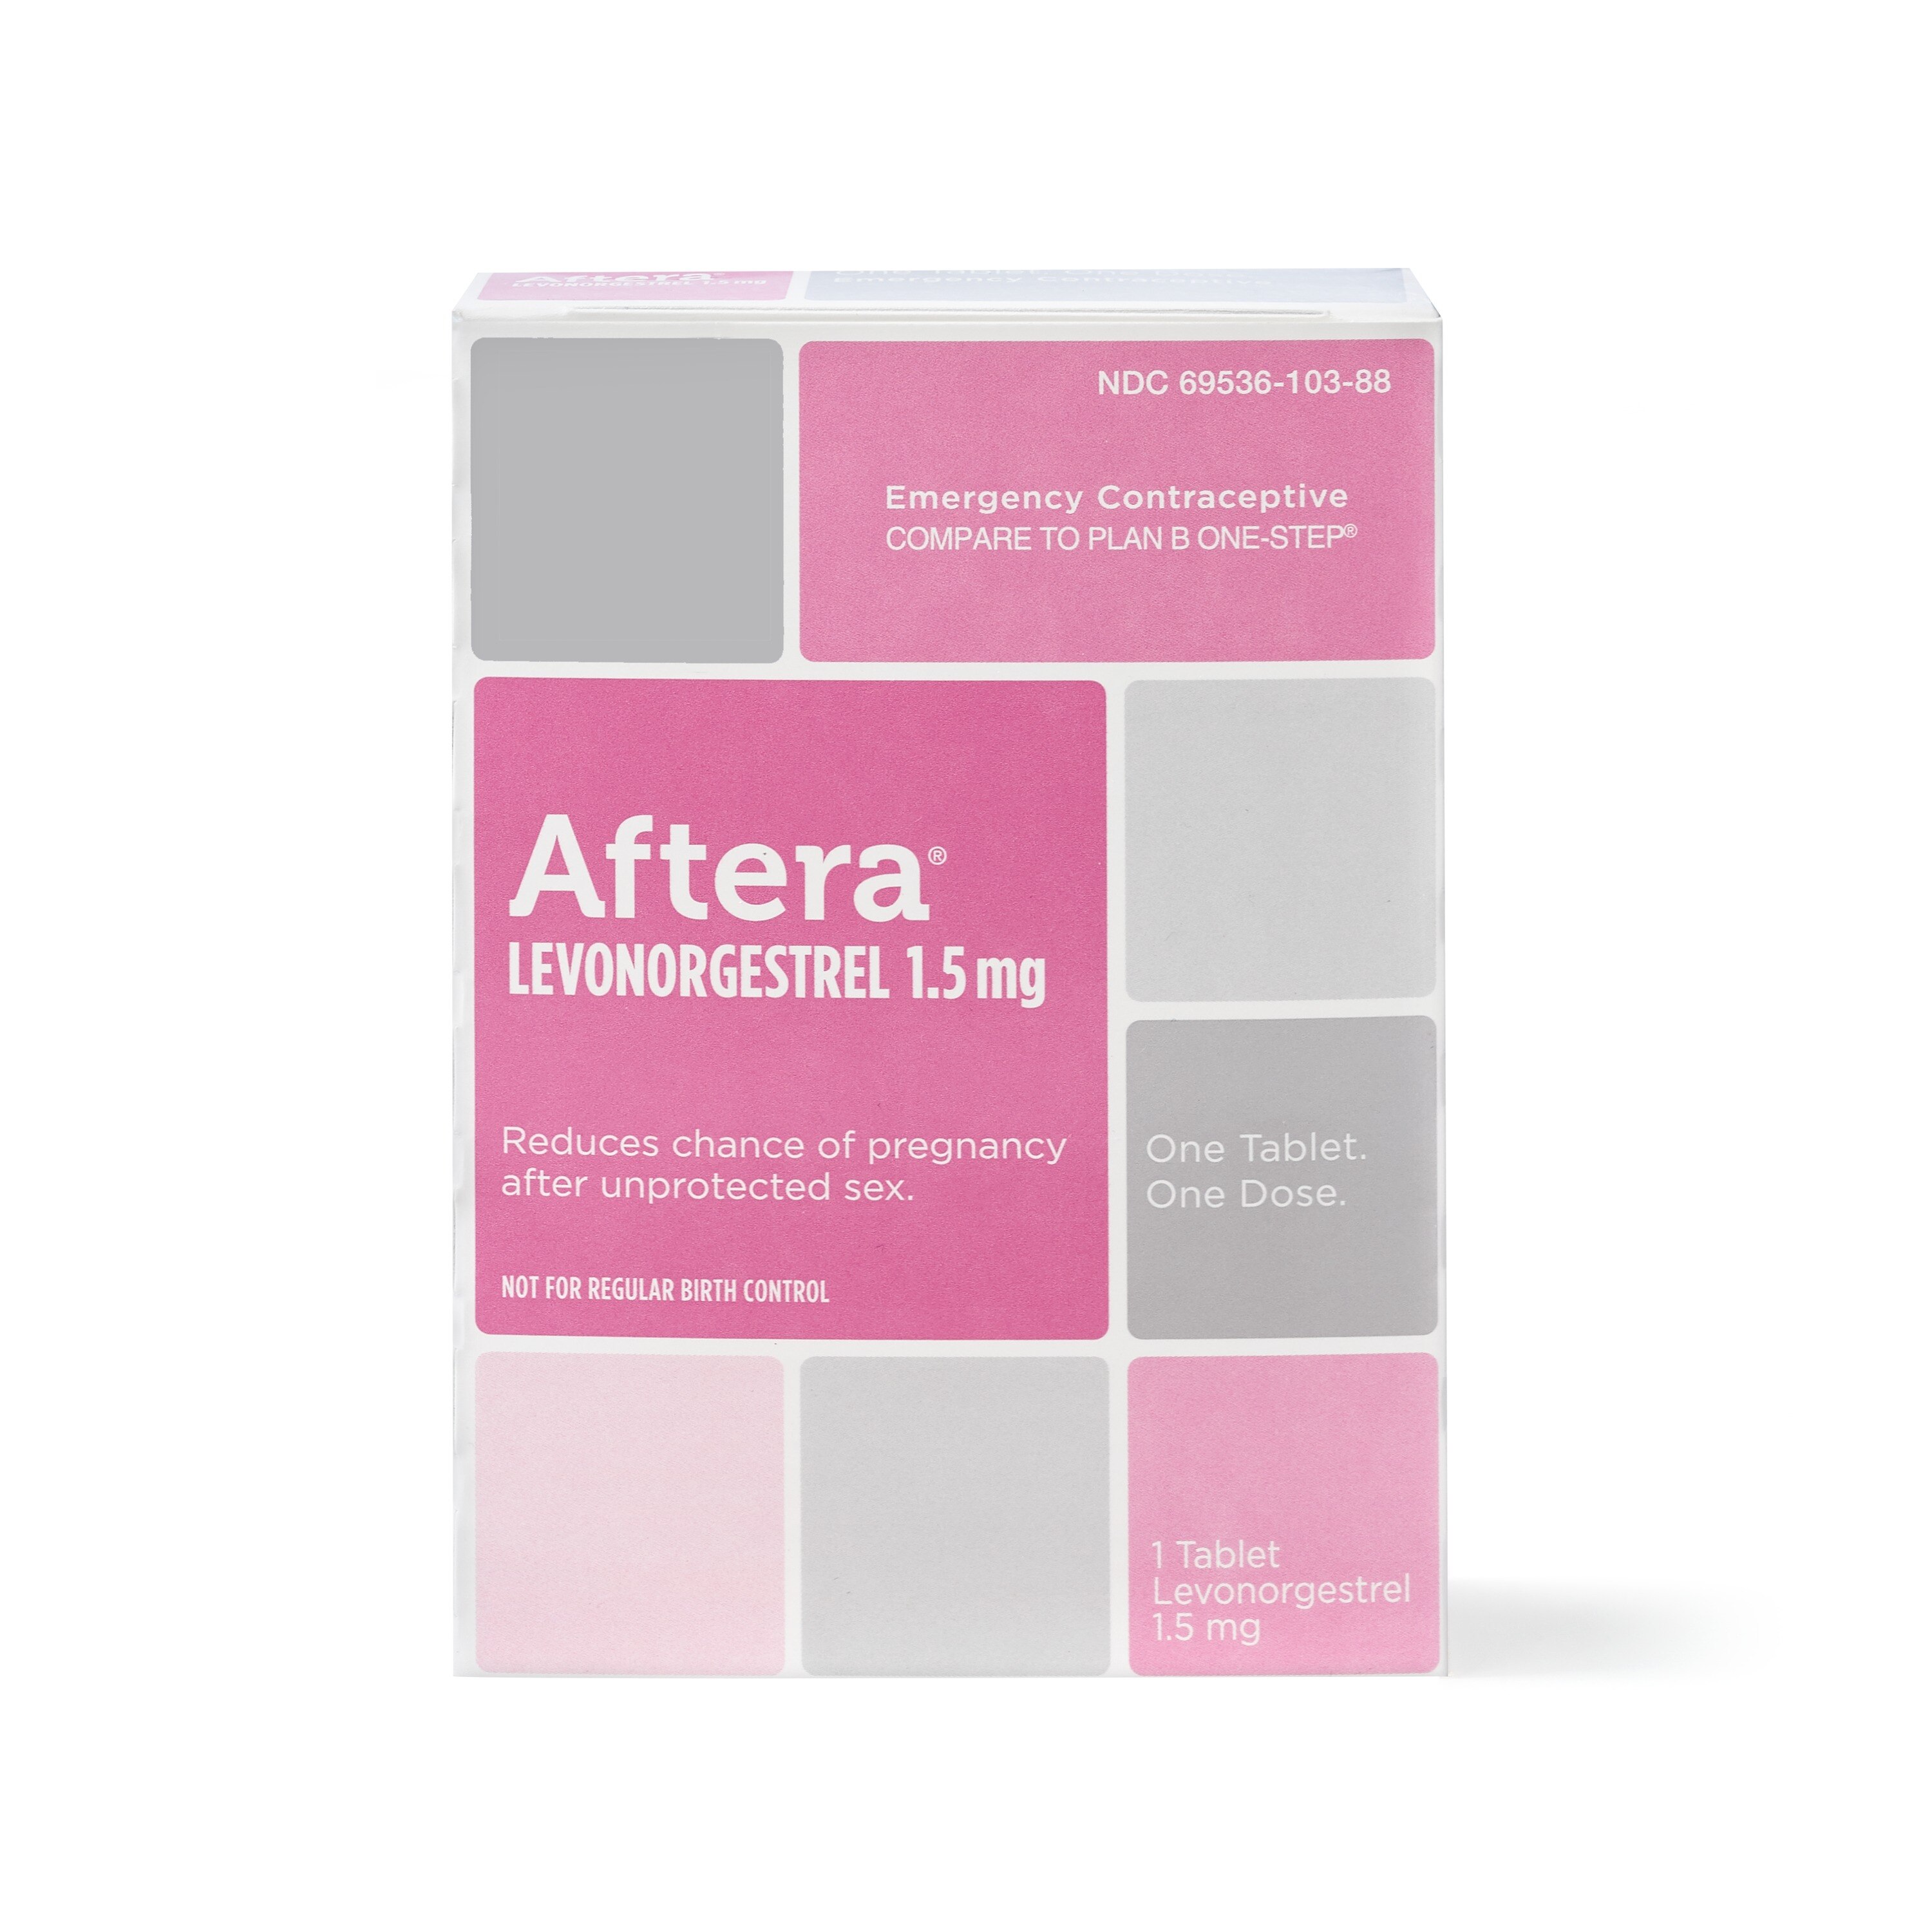 Aftera Levonorgestrel Emergency Contraceptive Tablet